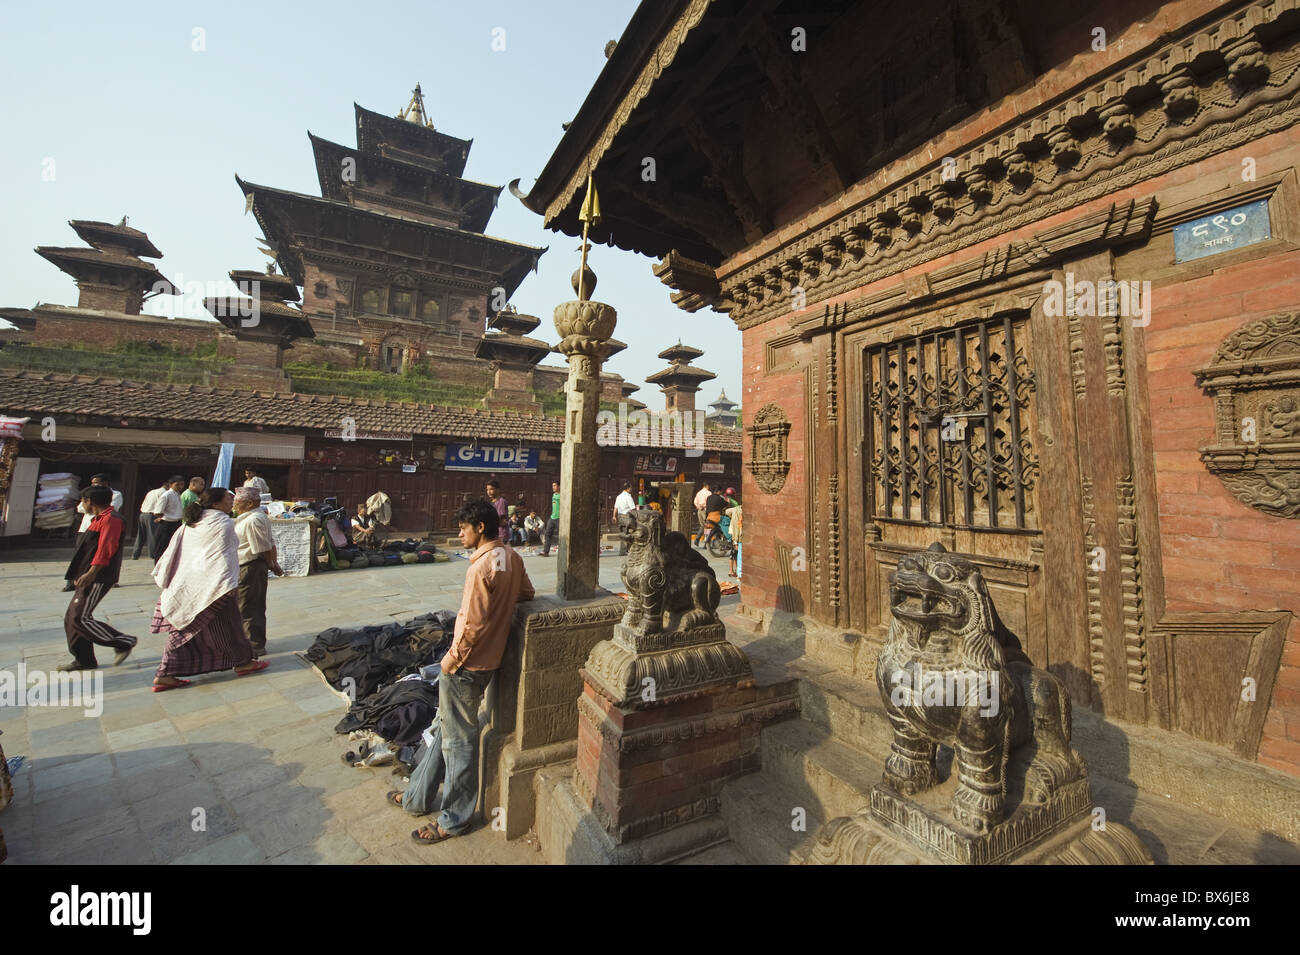 Temple and statues in Durbar Square, Kathmandu, Nepal, Asia Stock Photo